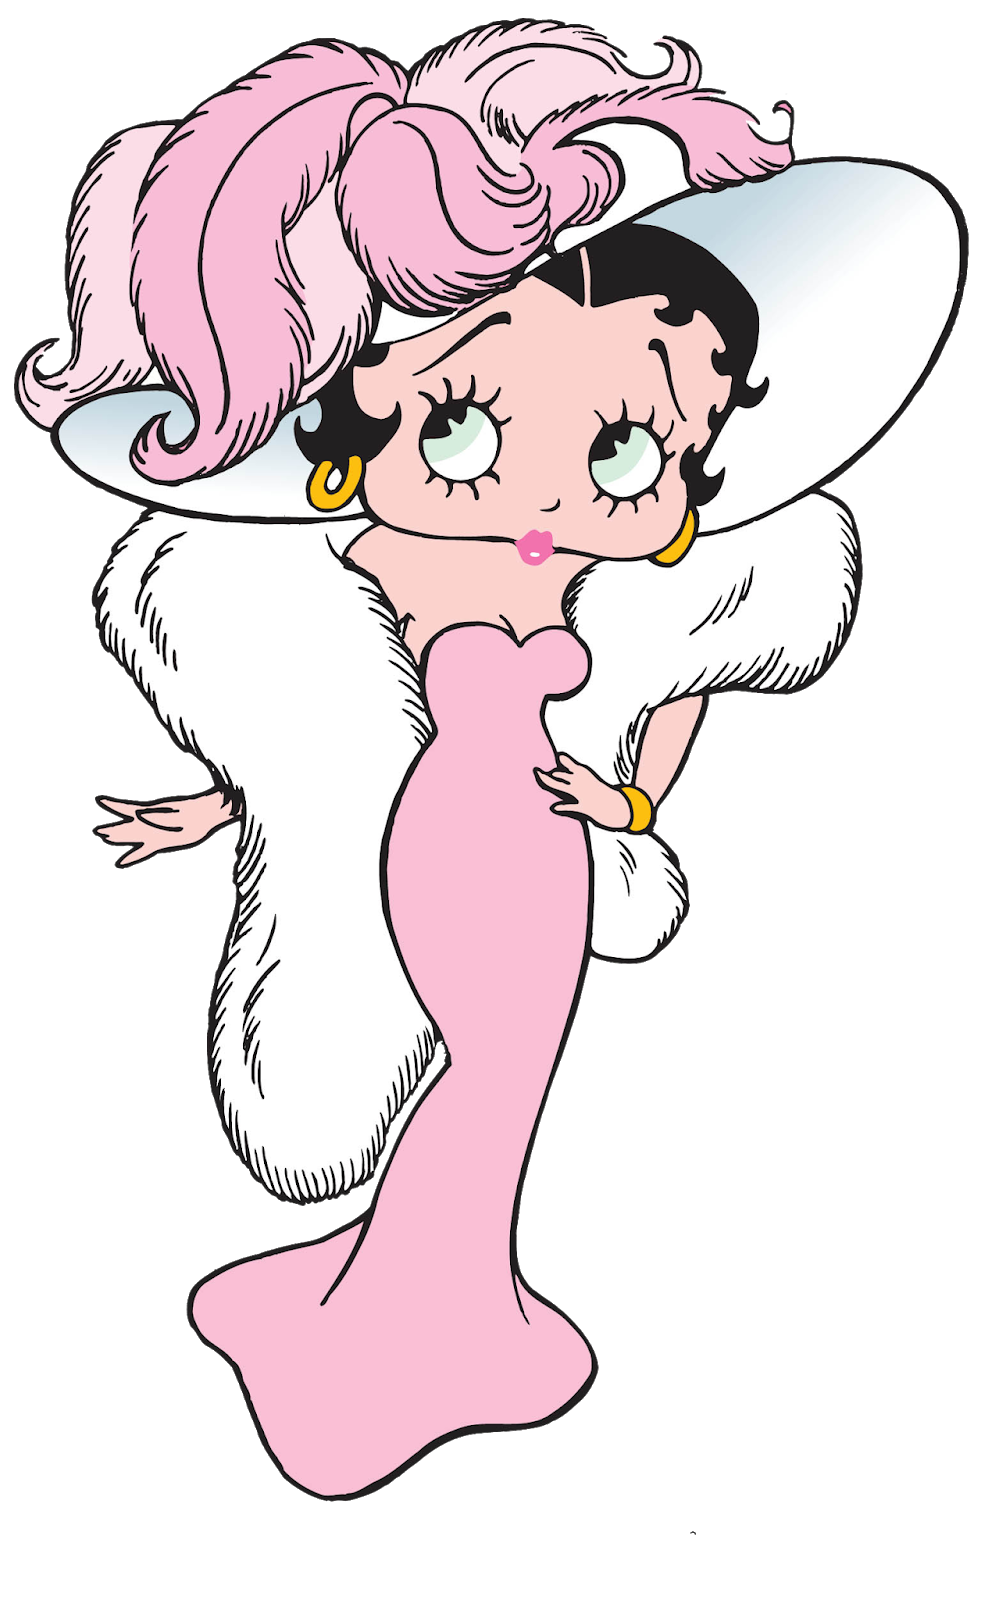 betty boop png